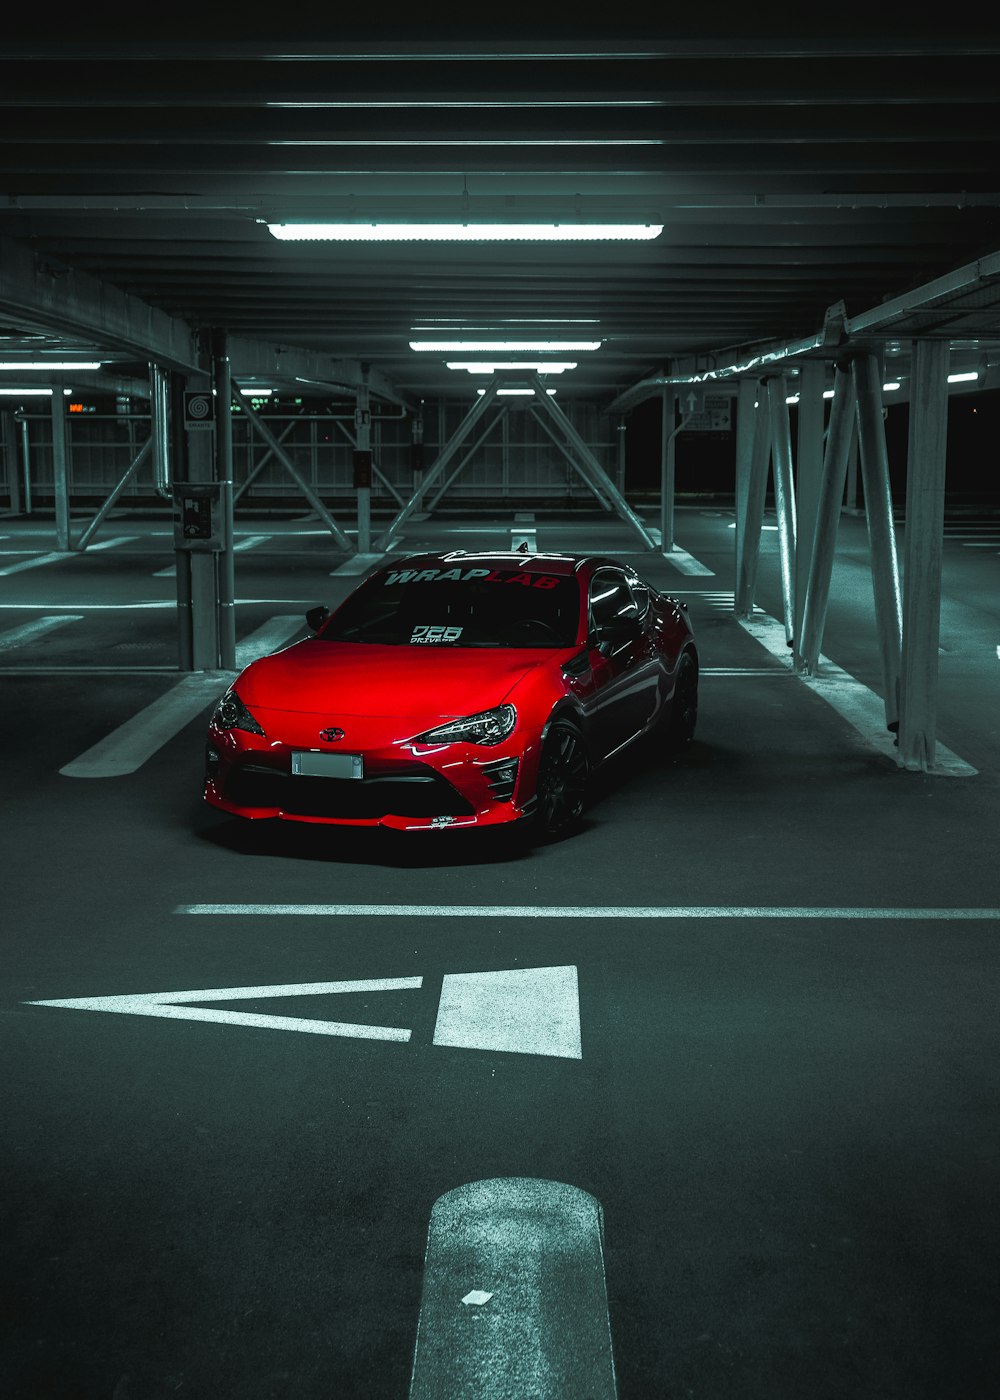 a red sports car parked in a parking garage